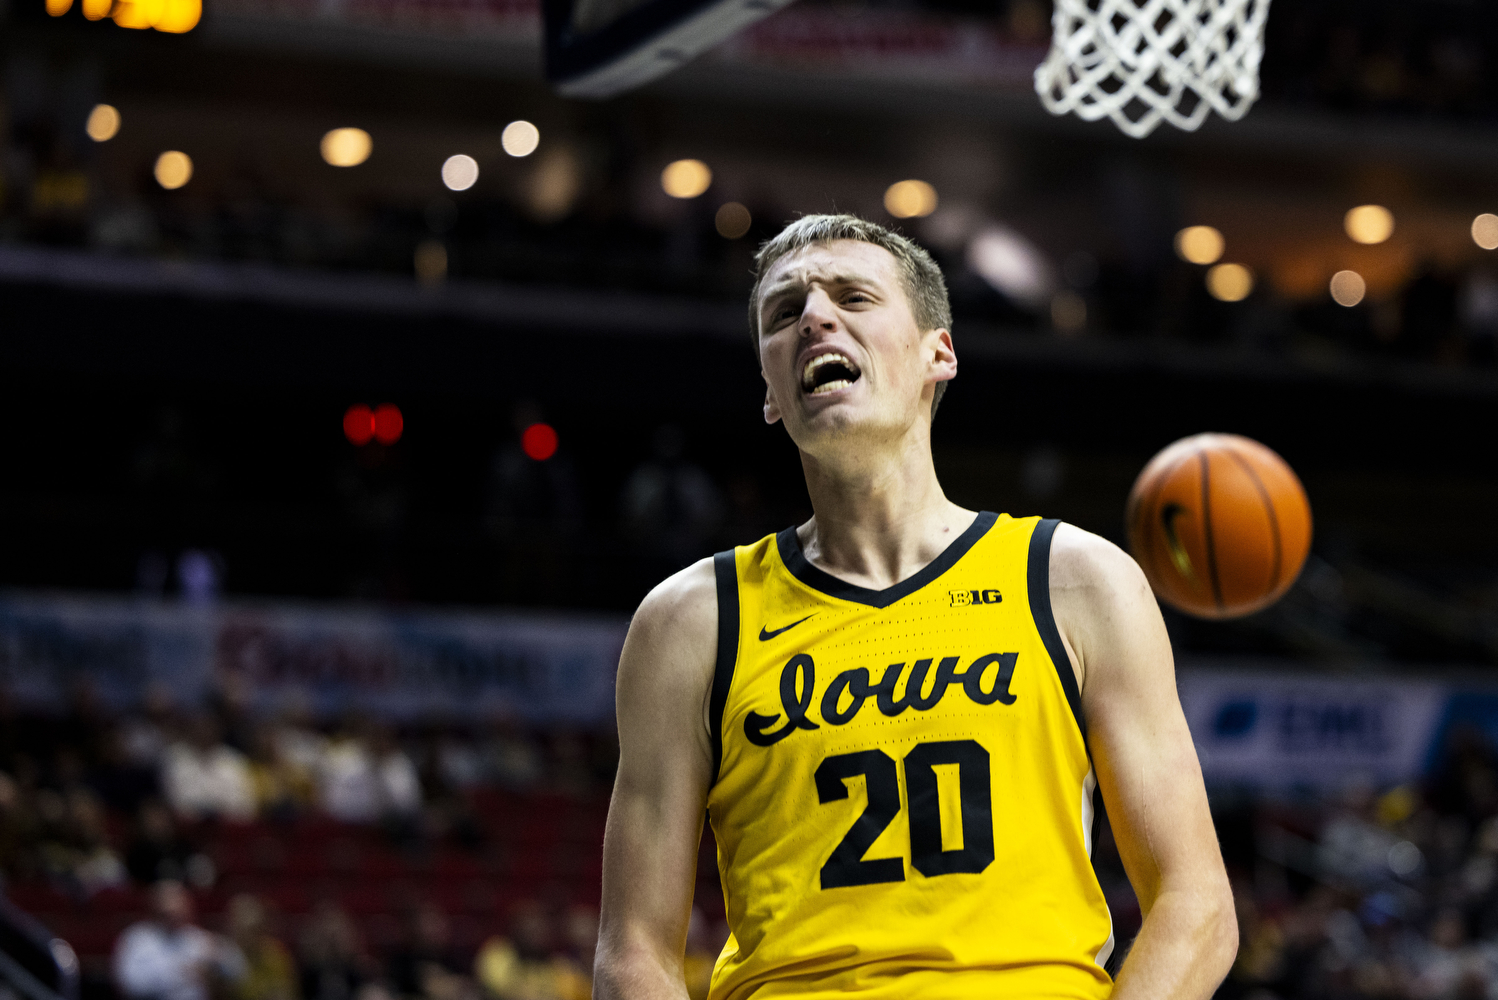 Iowa men's basketball triumphs, 90-81, in historic fashion over Penn State Tuesday at Carver-Hawkeye Arena